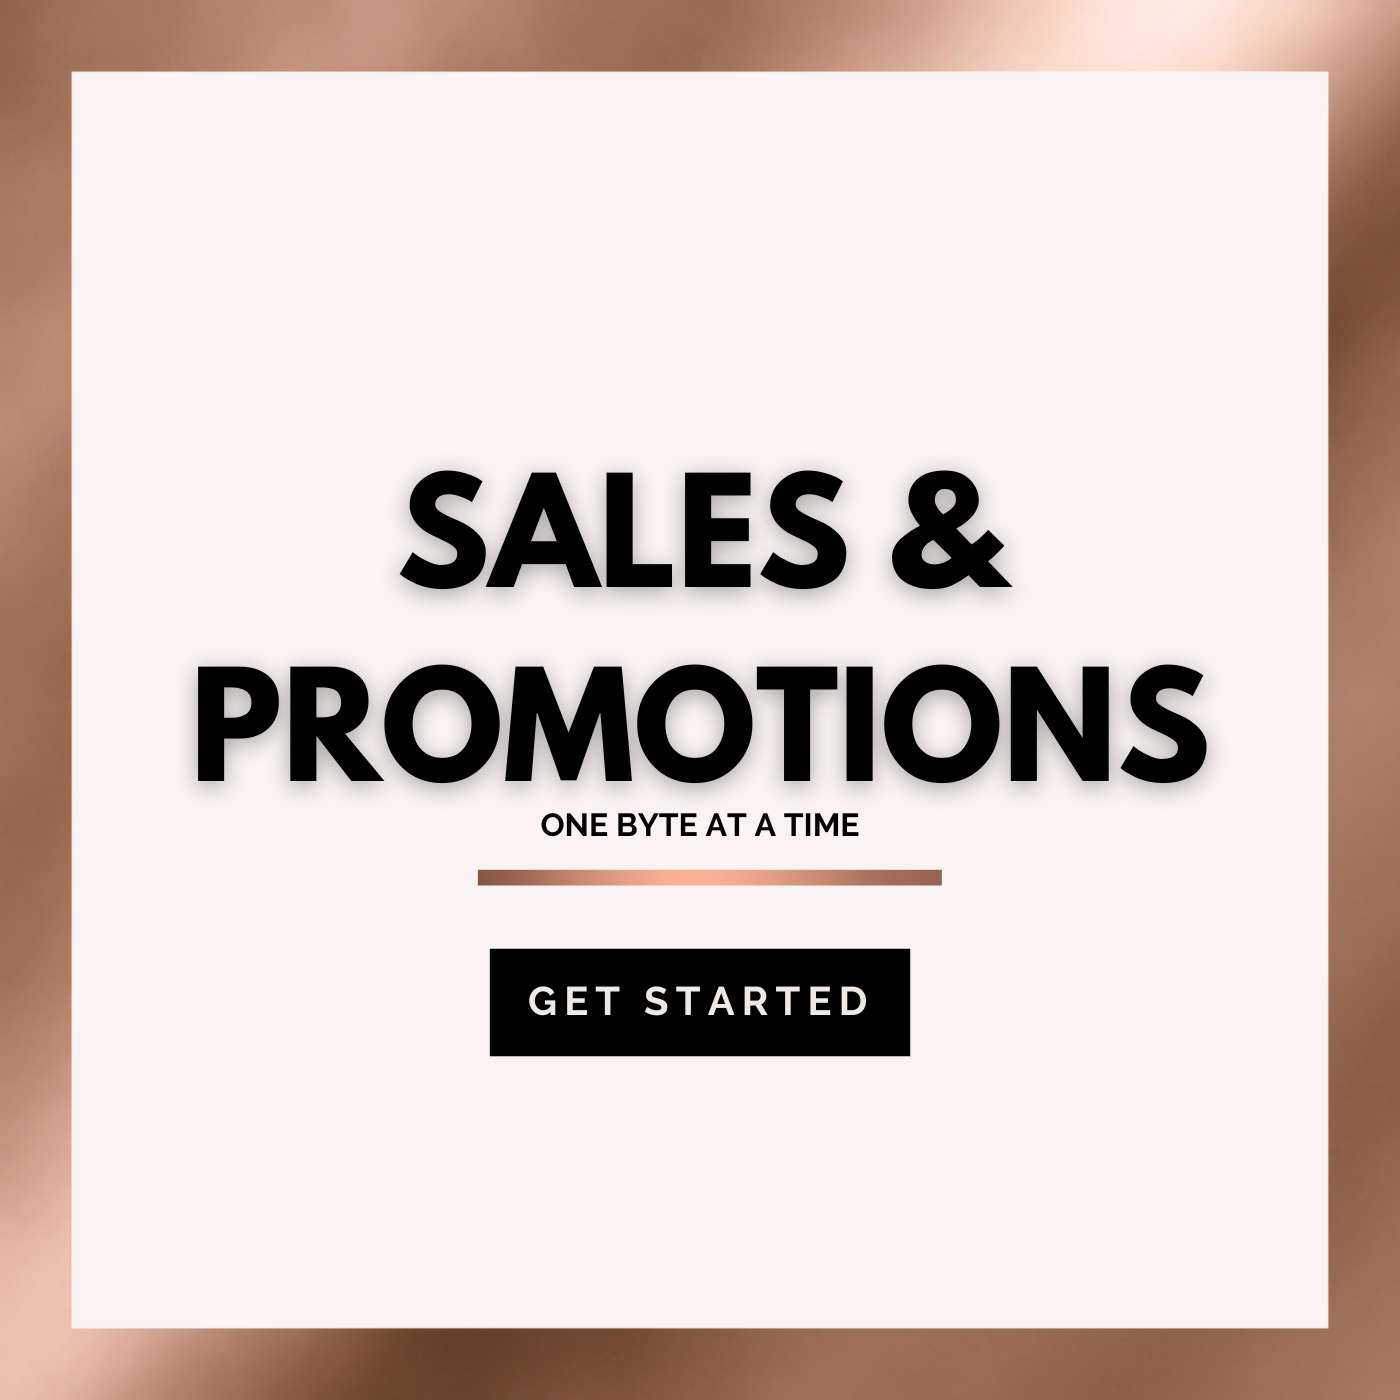 SALES AND PROMOTIONS